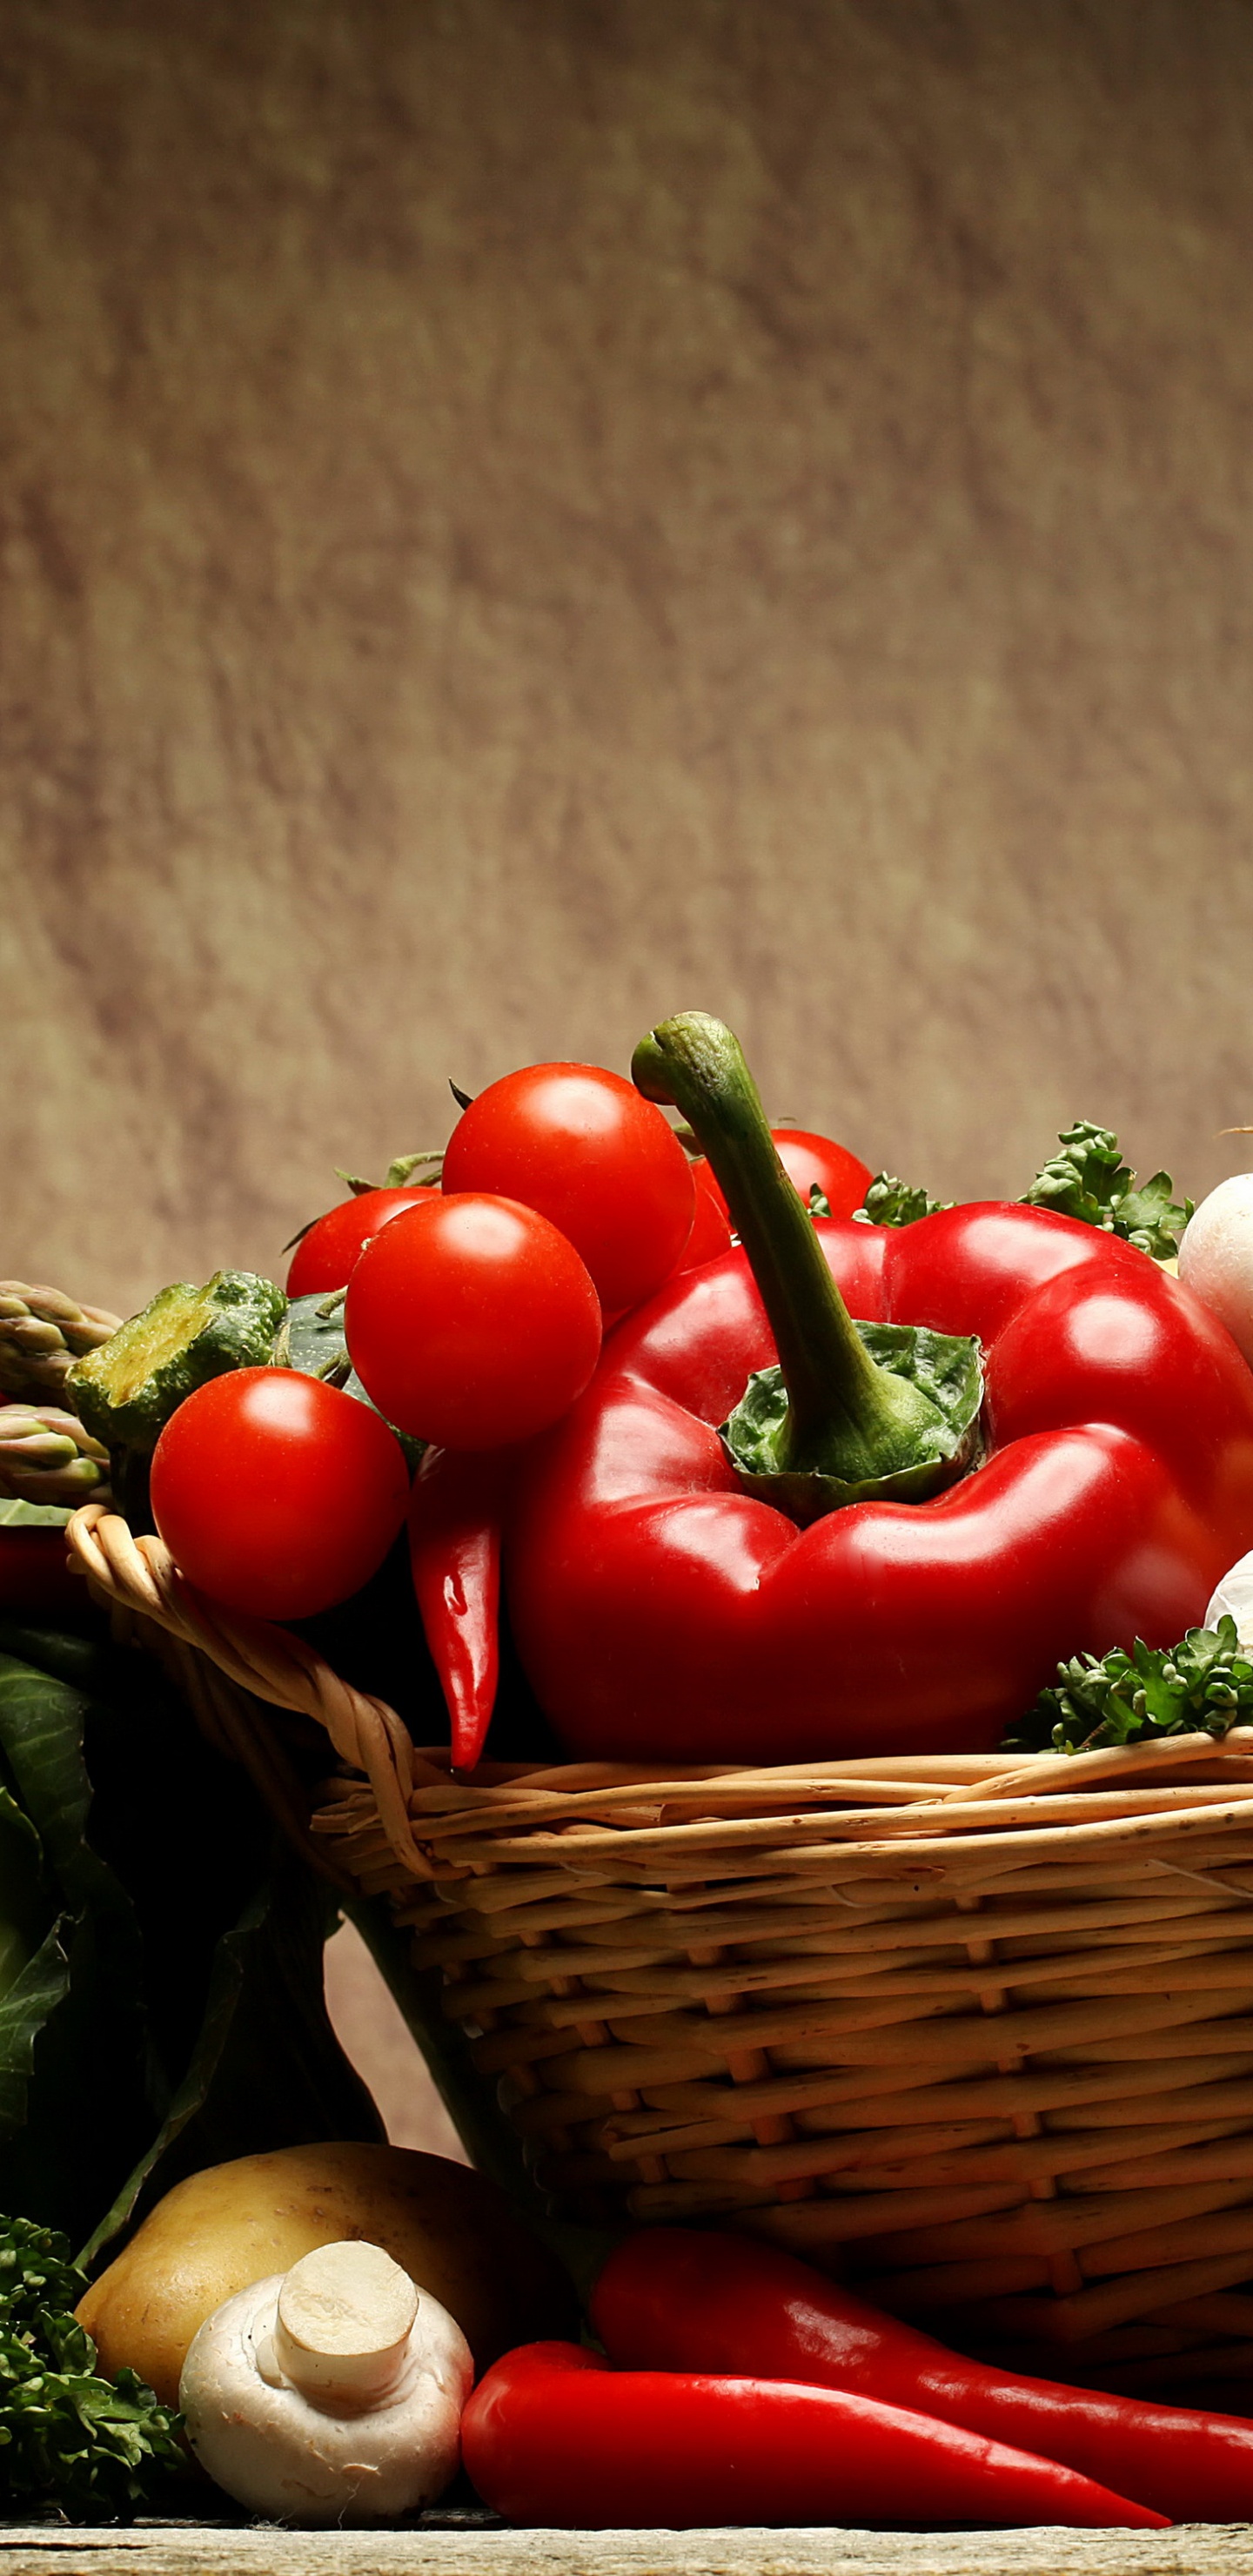 Red Tomatoes and Green Vegetable on Brown Woven Basket. Wallpaper in 1440x2960 Resolution